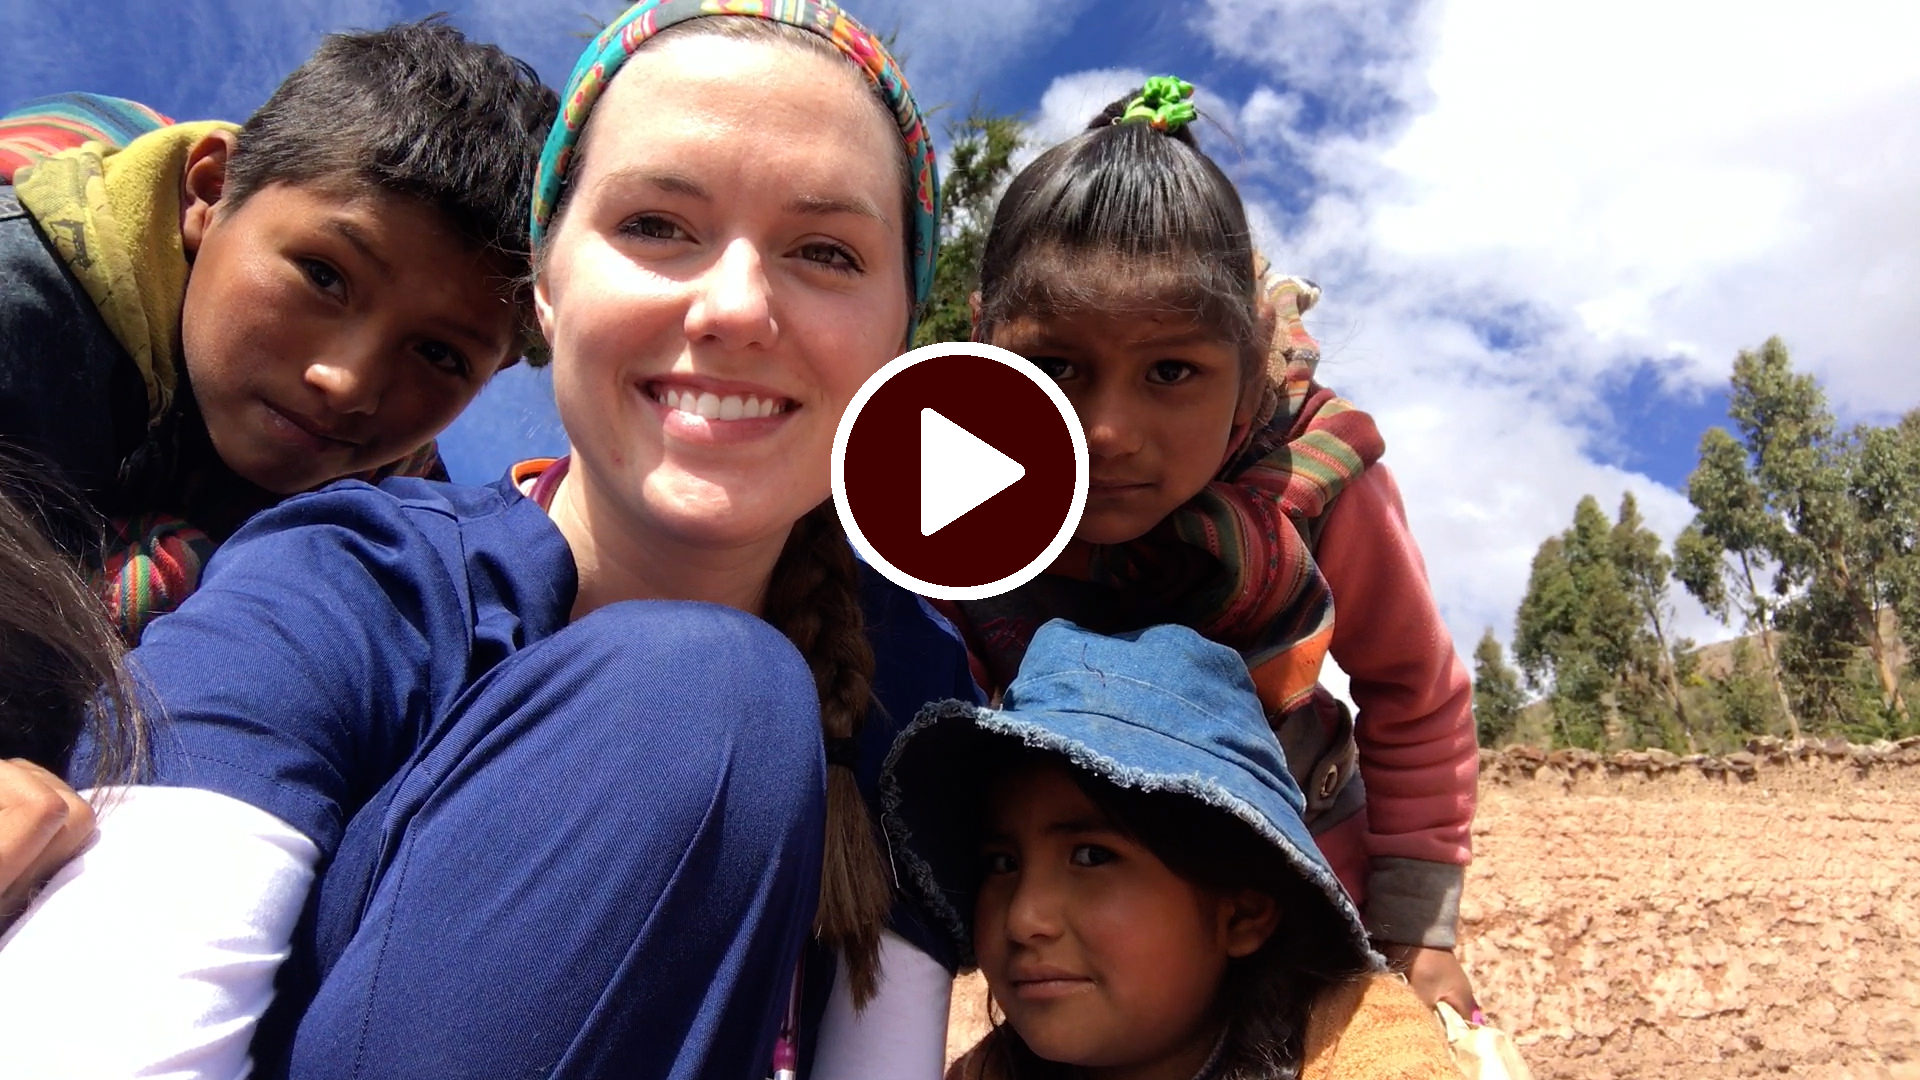 Watch the video: A group of inter-disciplinary Health Science Center students deliver care to the remote village of Quesimpuco, Bolivia.